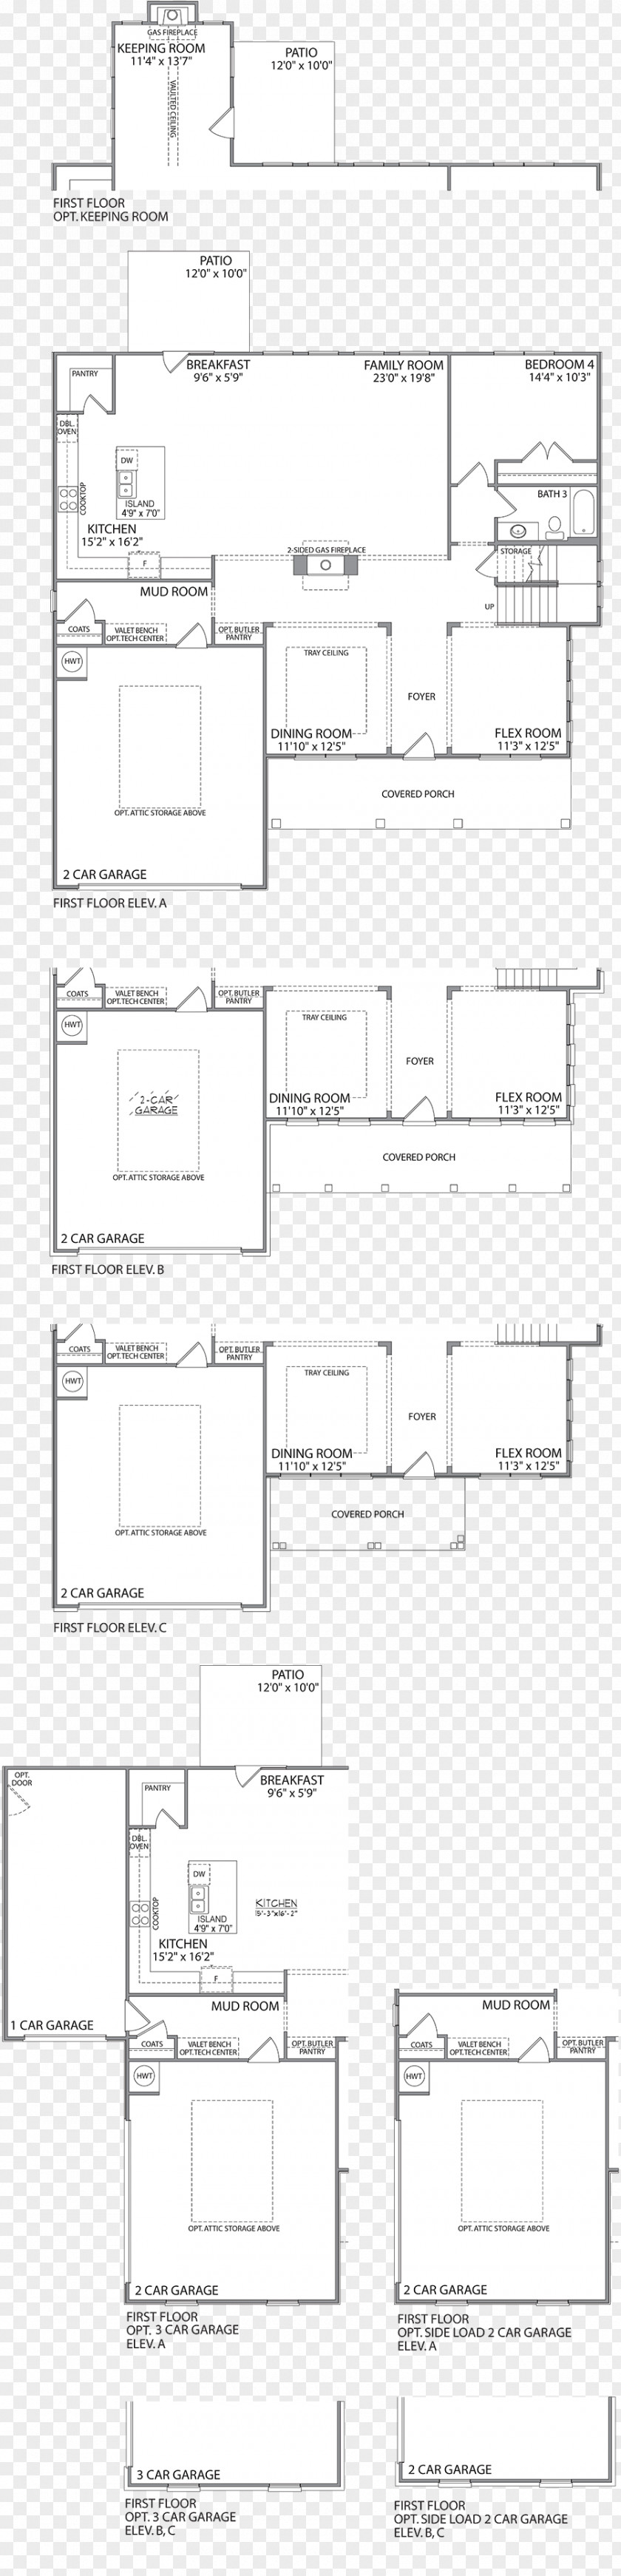 Design Floor Plan Paper Technical Drawing PNG